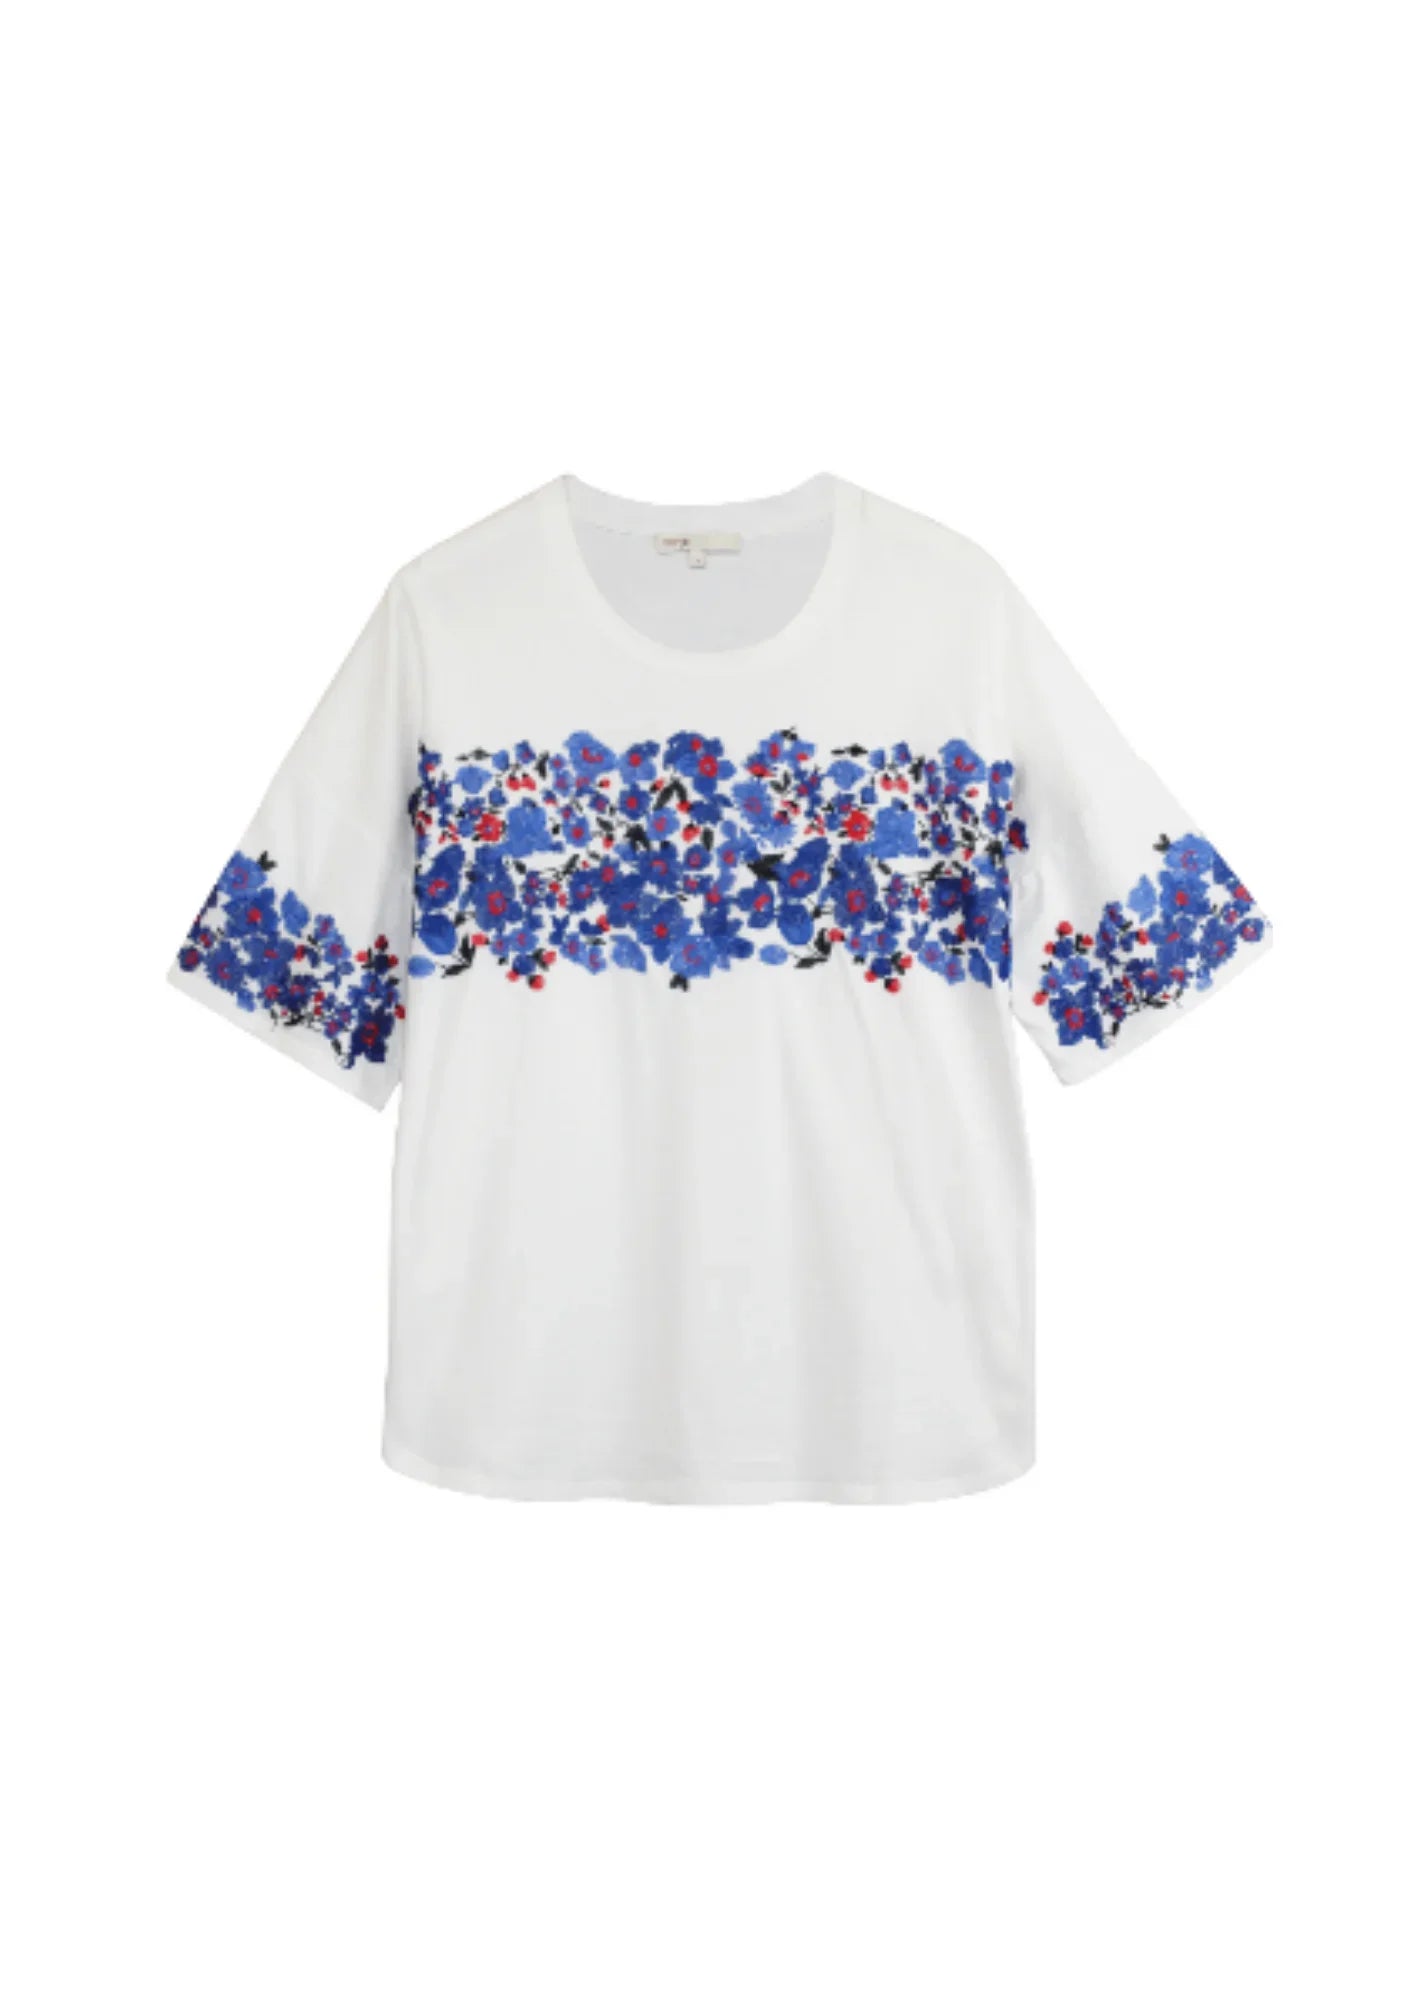 T-SHIRT WITH EMBROIDERED FLORAL TEXTURE